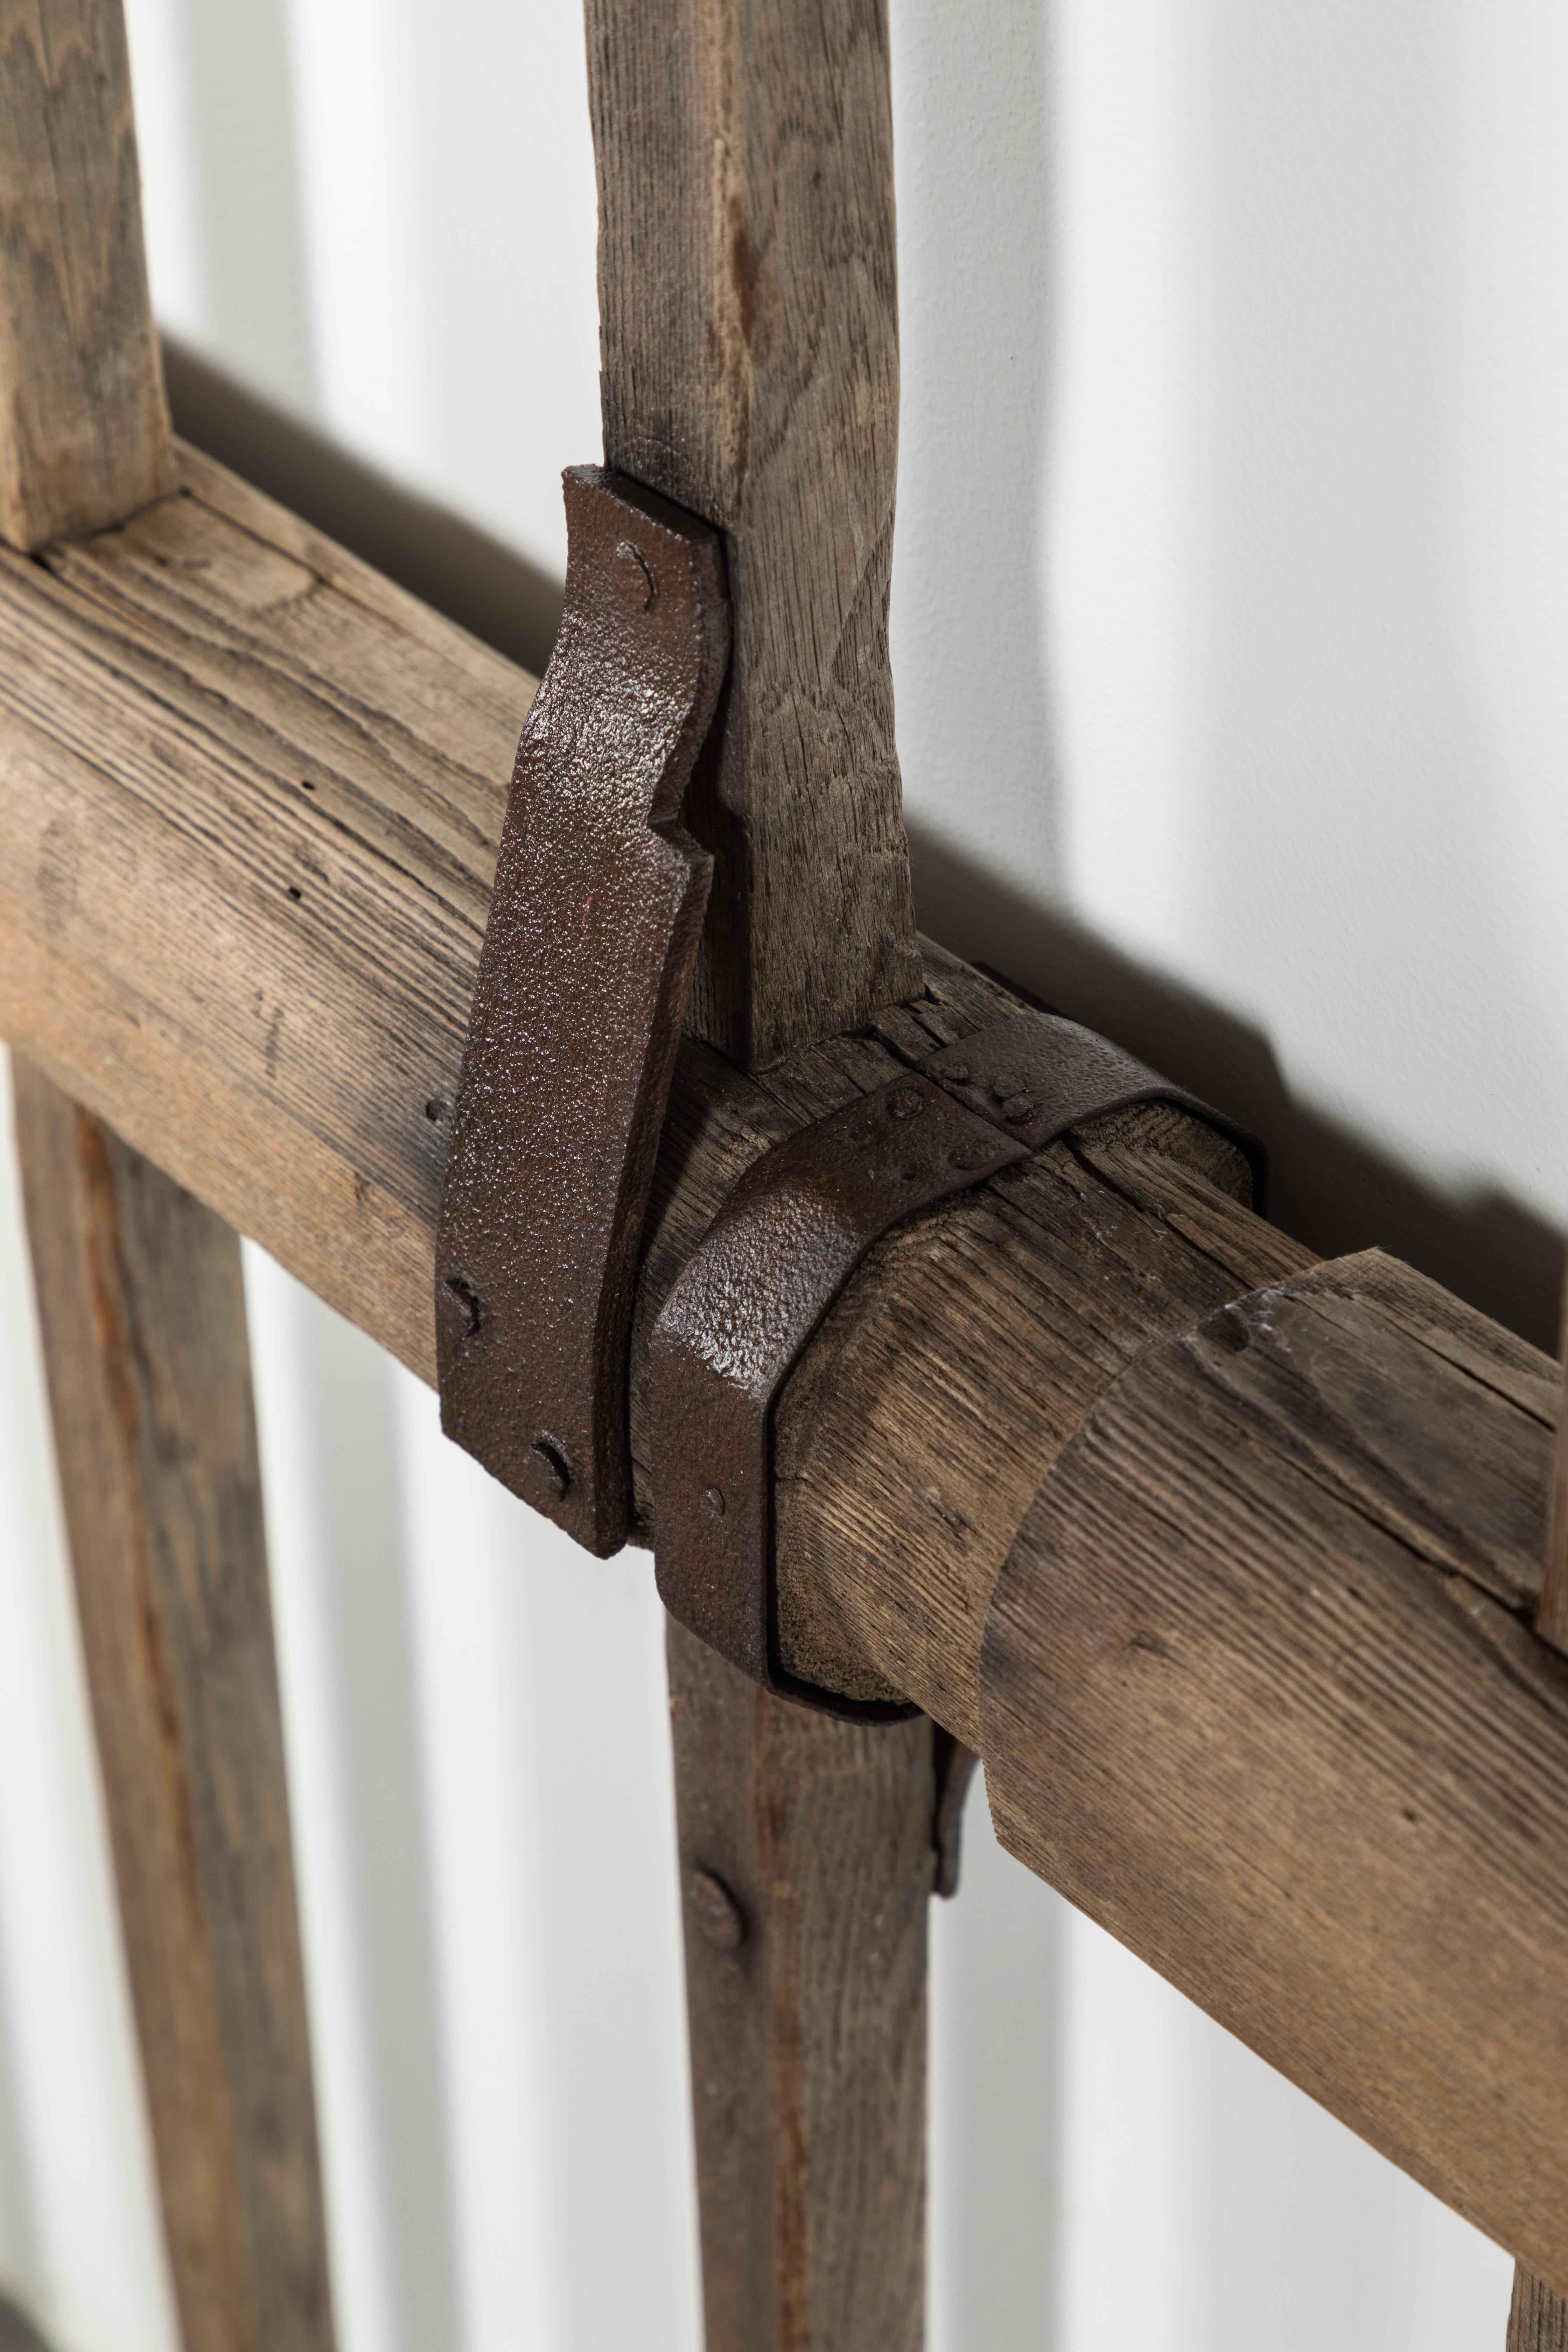 North American Sculptural Wood and Iron Strap 19th Century Farm Implement For Sale